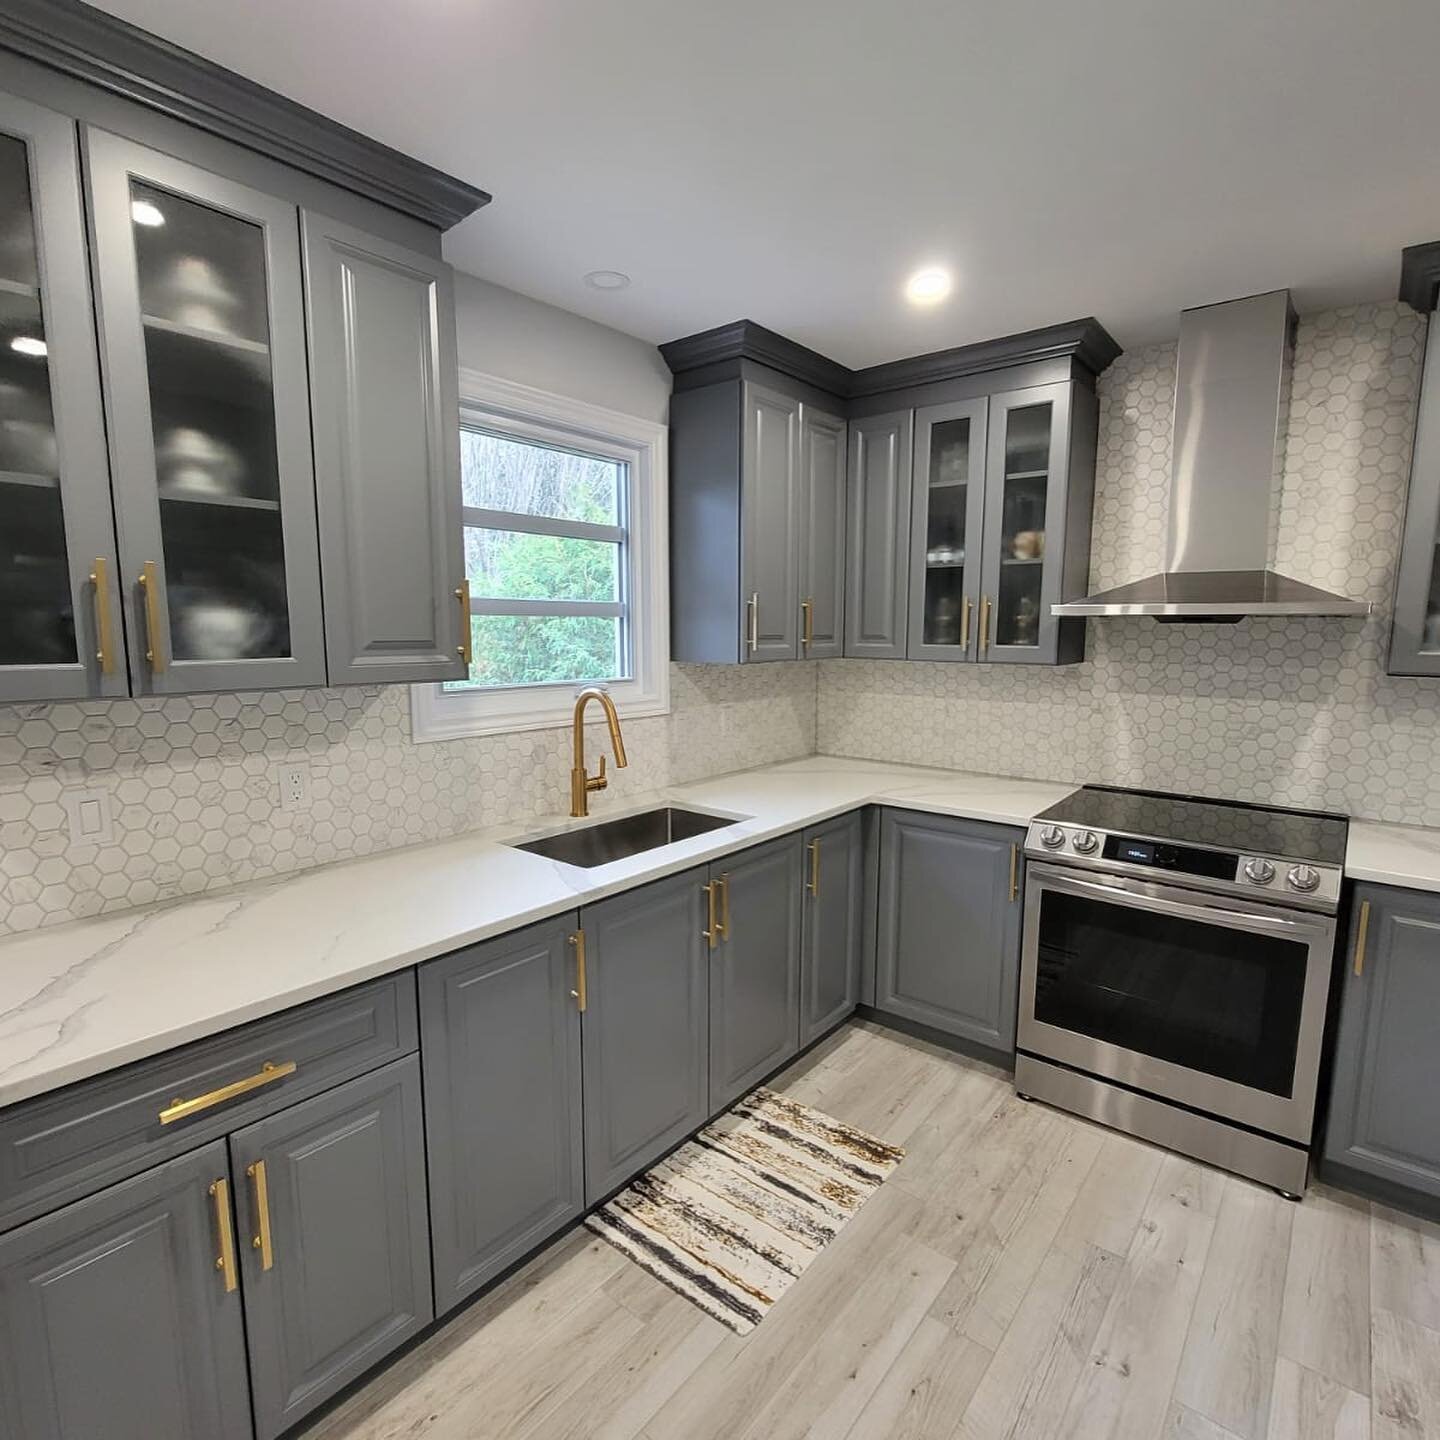 Like ❤️ 
If you like ...
.
.
.
.
.
.
.
.
.
Done by Raco!
#kitchen #done #design #desingedbyddesign #turnkey #atoz #laval #happyclients #anotheronedone #renovation #fromscratch #like #followus